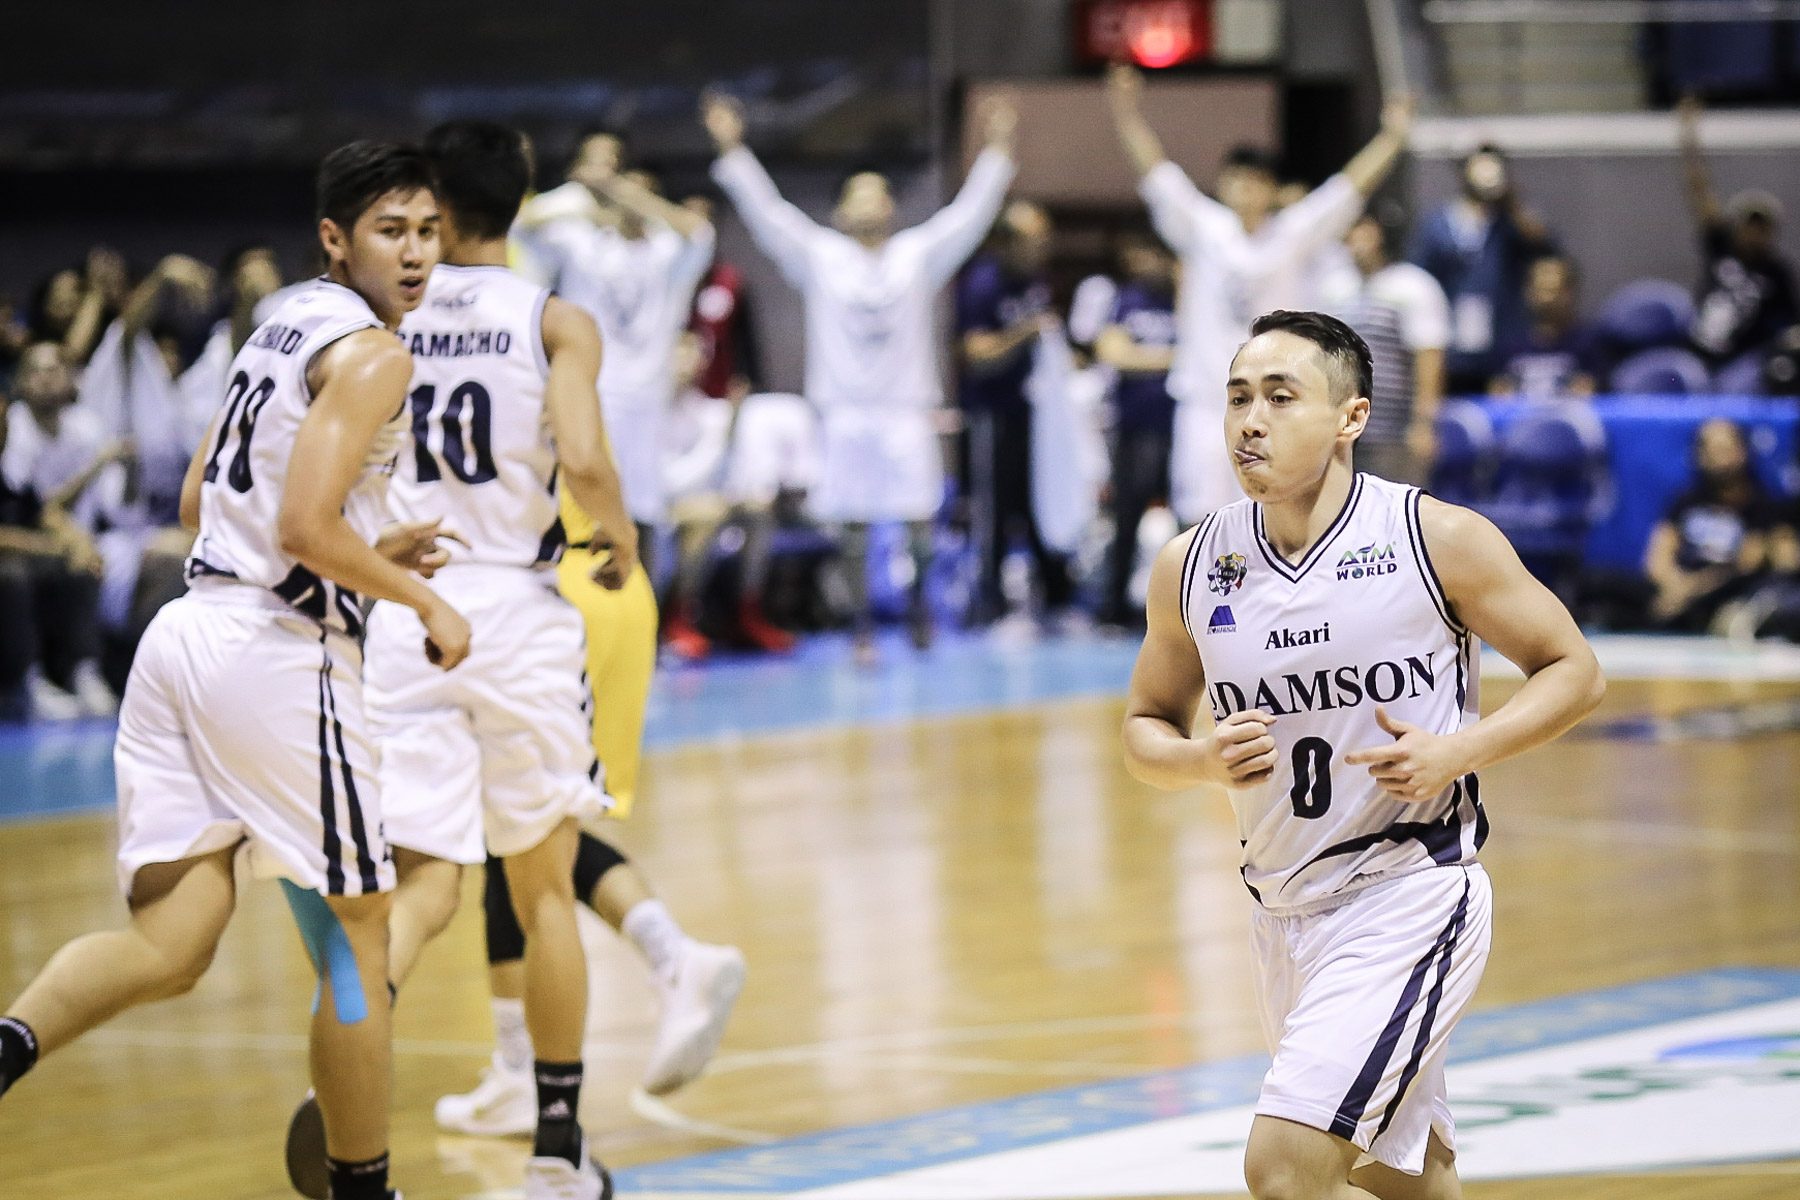 Soaring Falcons bounce back from Ateneo loss to win against the Growling Tigers